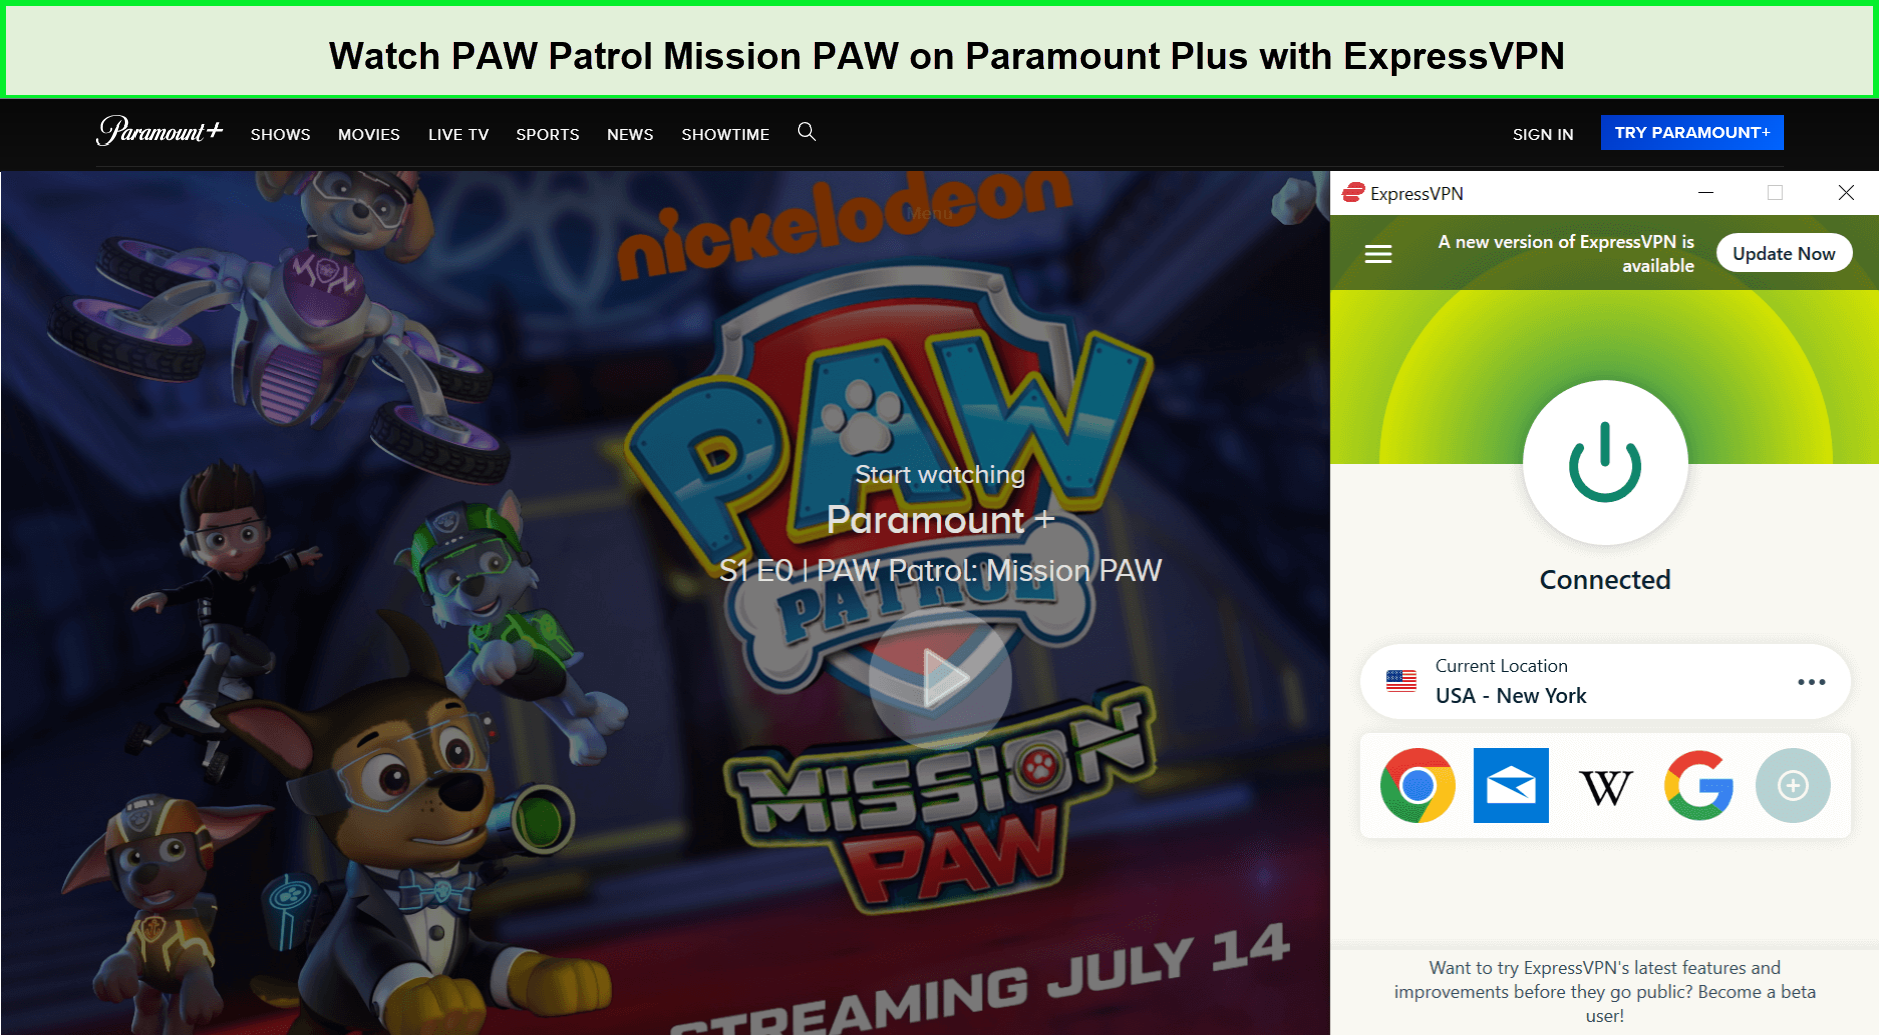 Watch-PAW-Patrol-Mission-PAW-in-UAE-on-Paramount-Plus-with-ExpressVPN